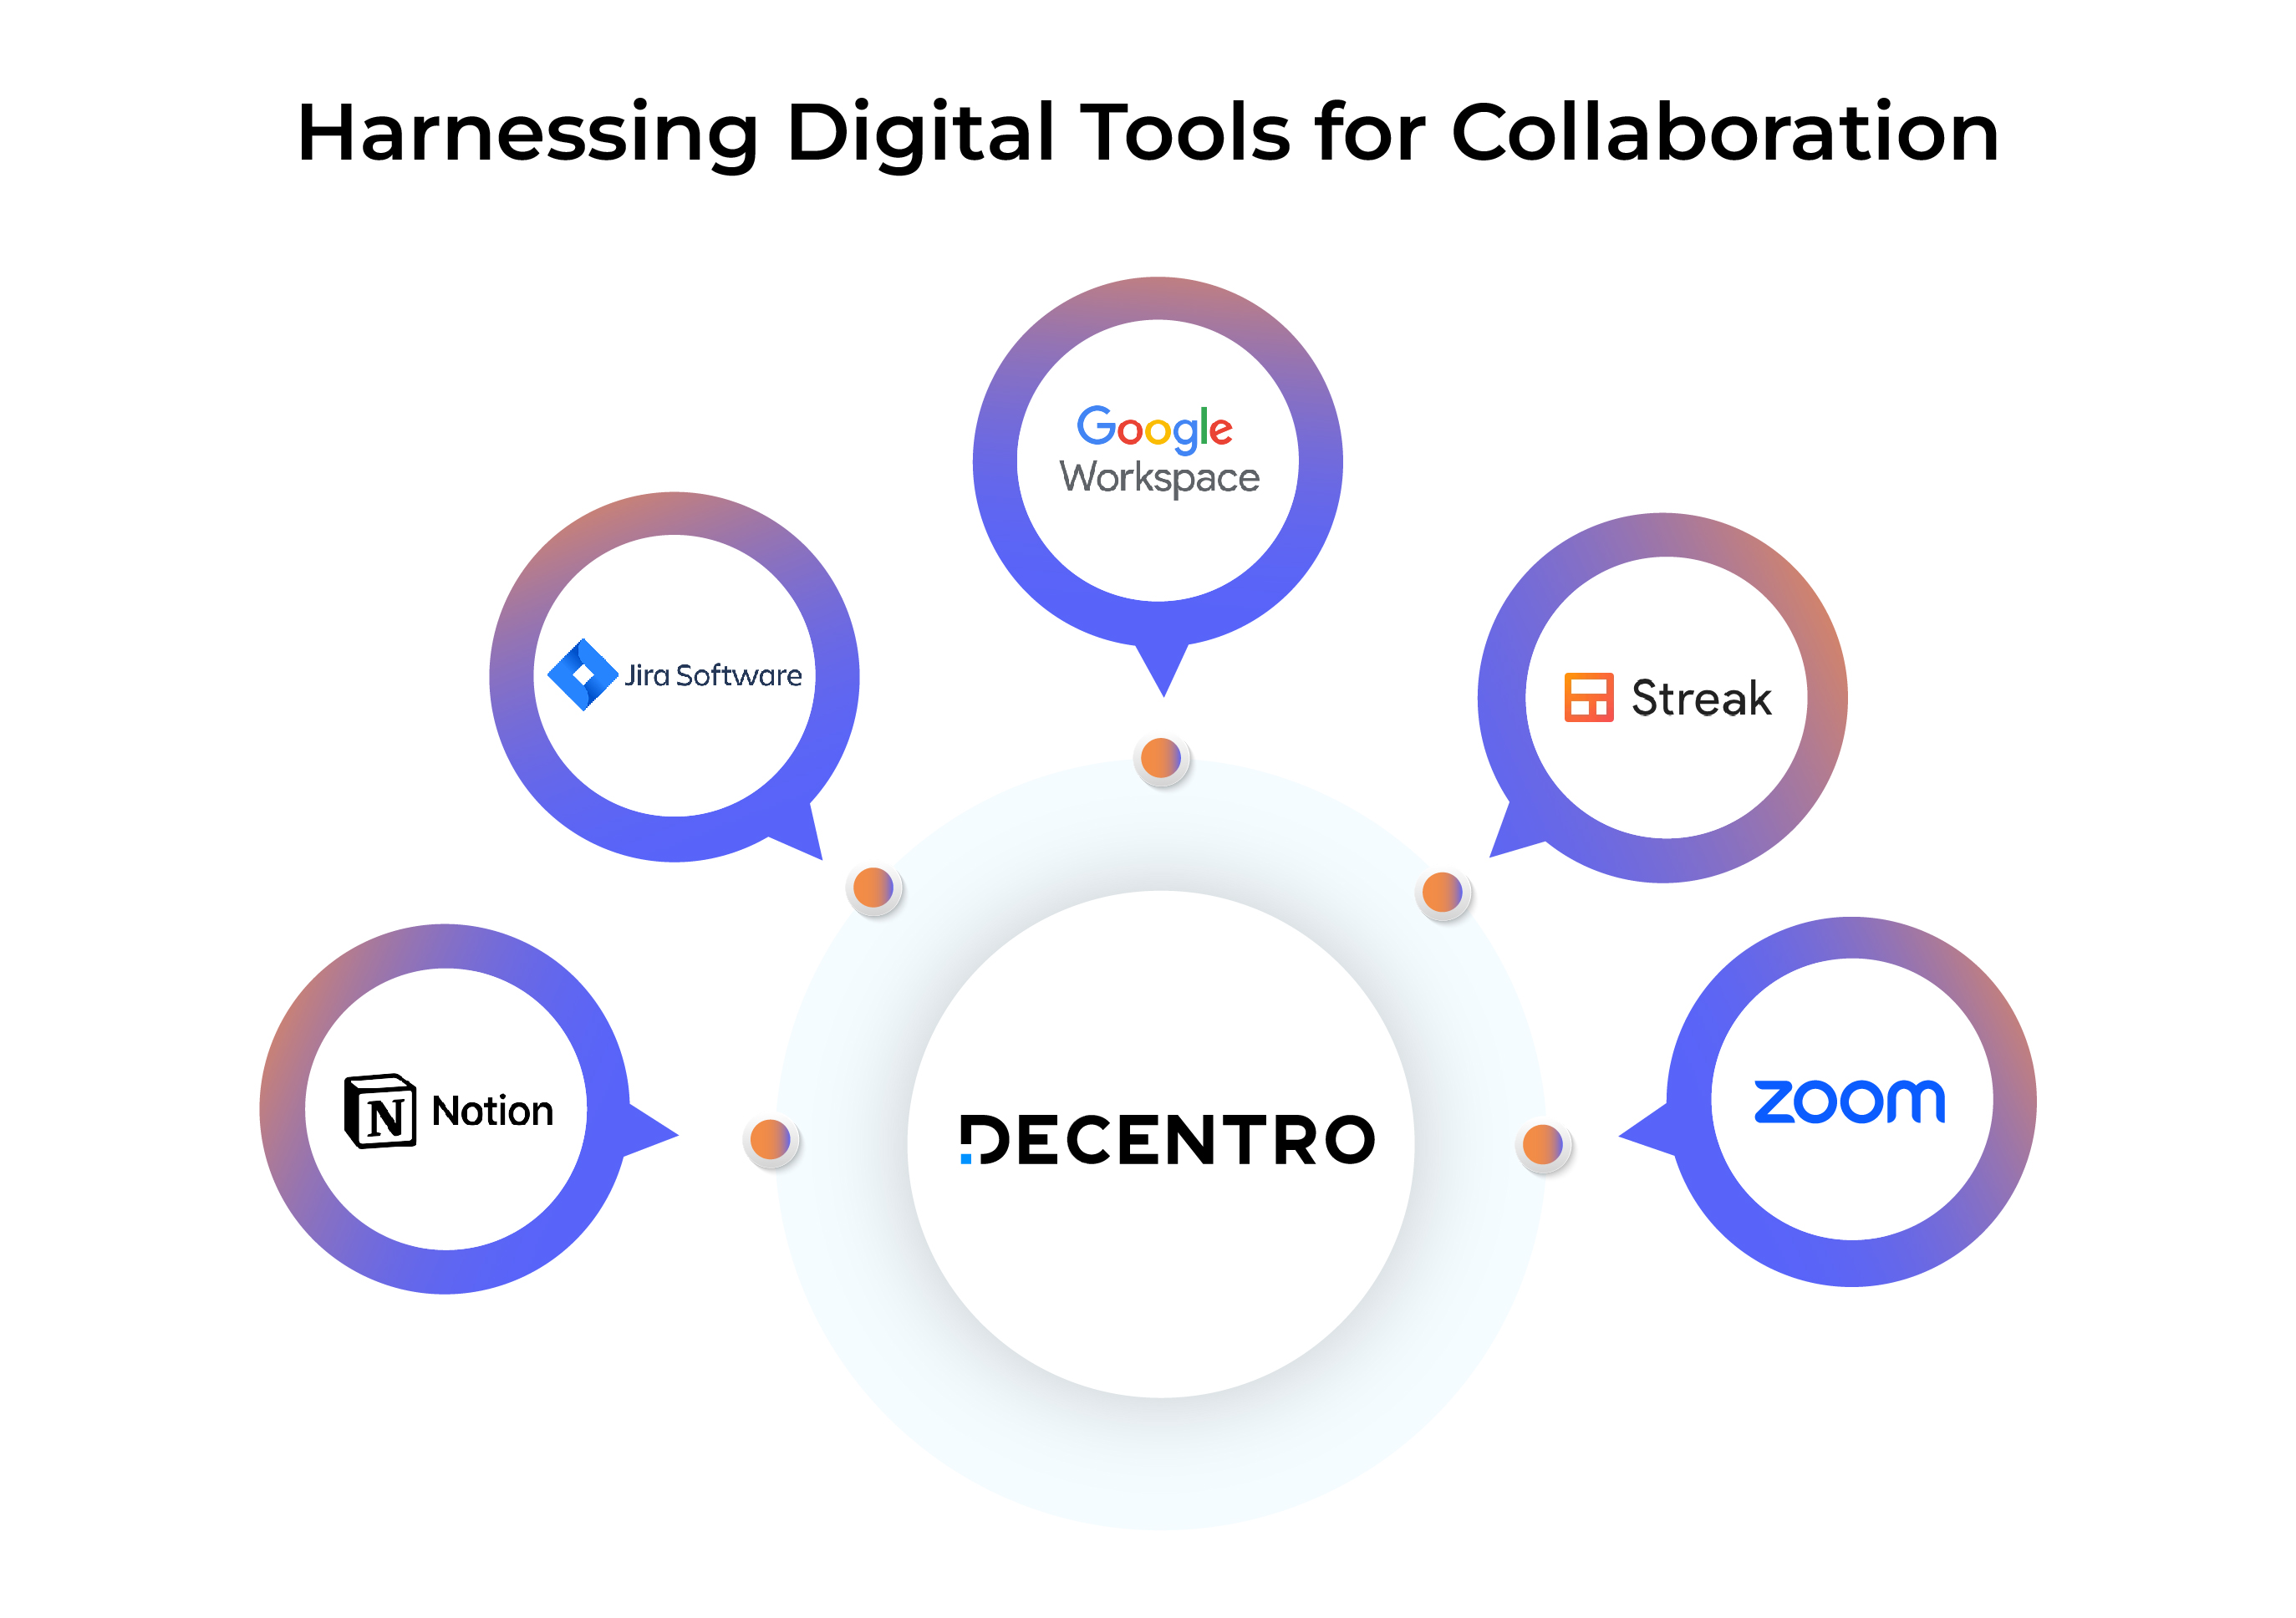 The power of tool enabled collaboration w.r.t Decentro